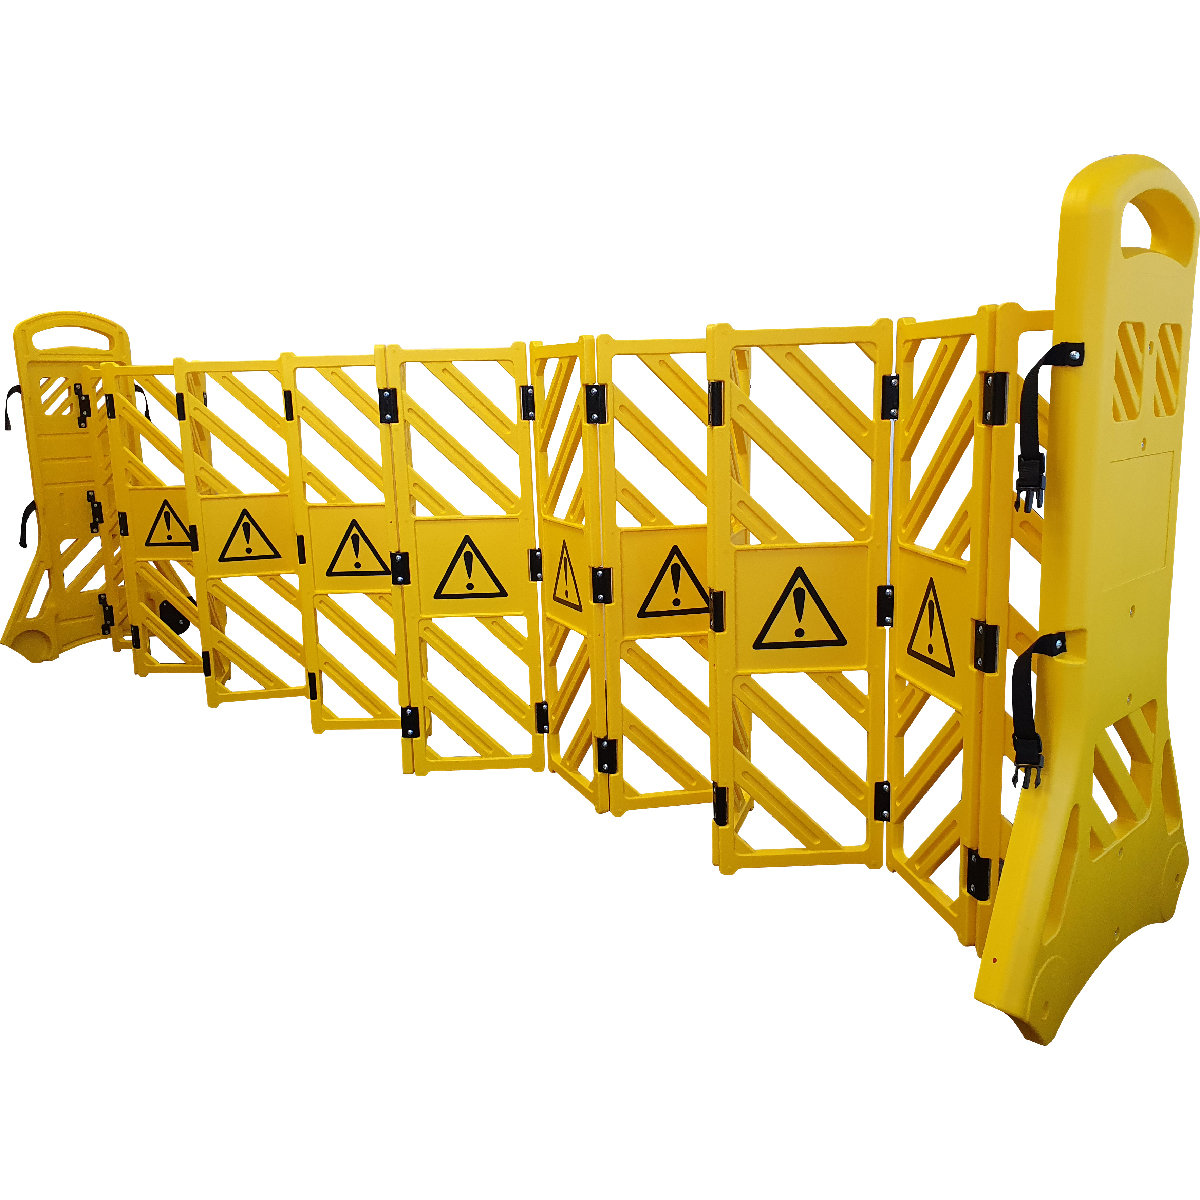 Buy Expandable Barrier Gate   in Expandable Barriers from GuardX available at Astrolift NZ